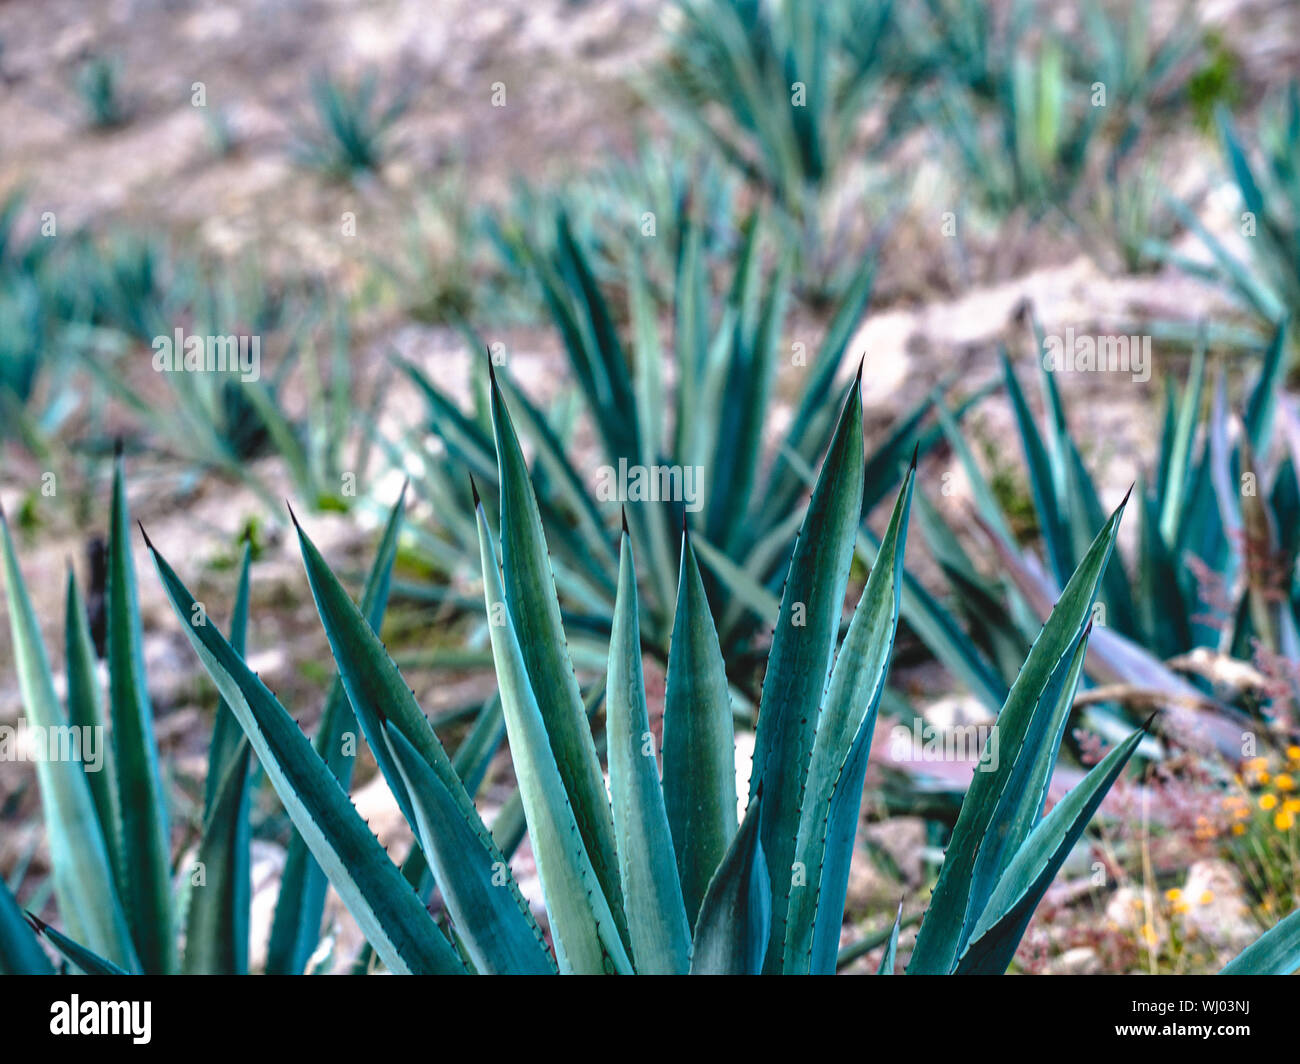 Cactuses Growing On Field Stock Photo